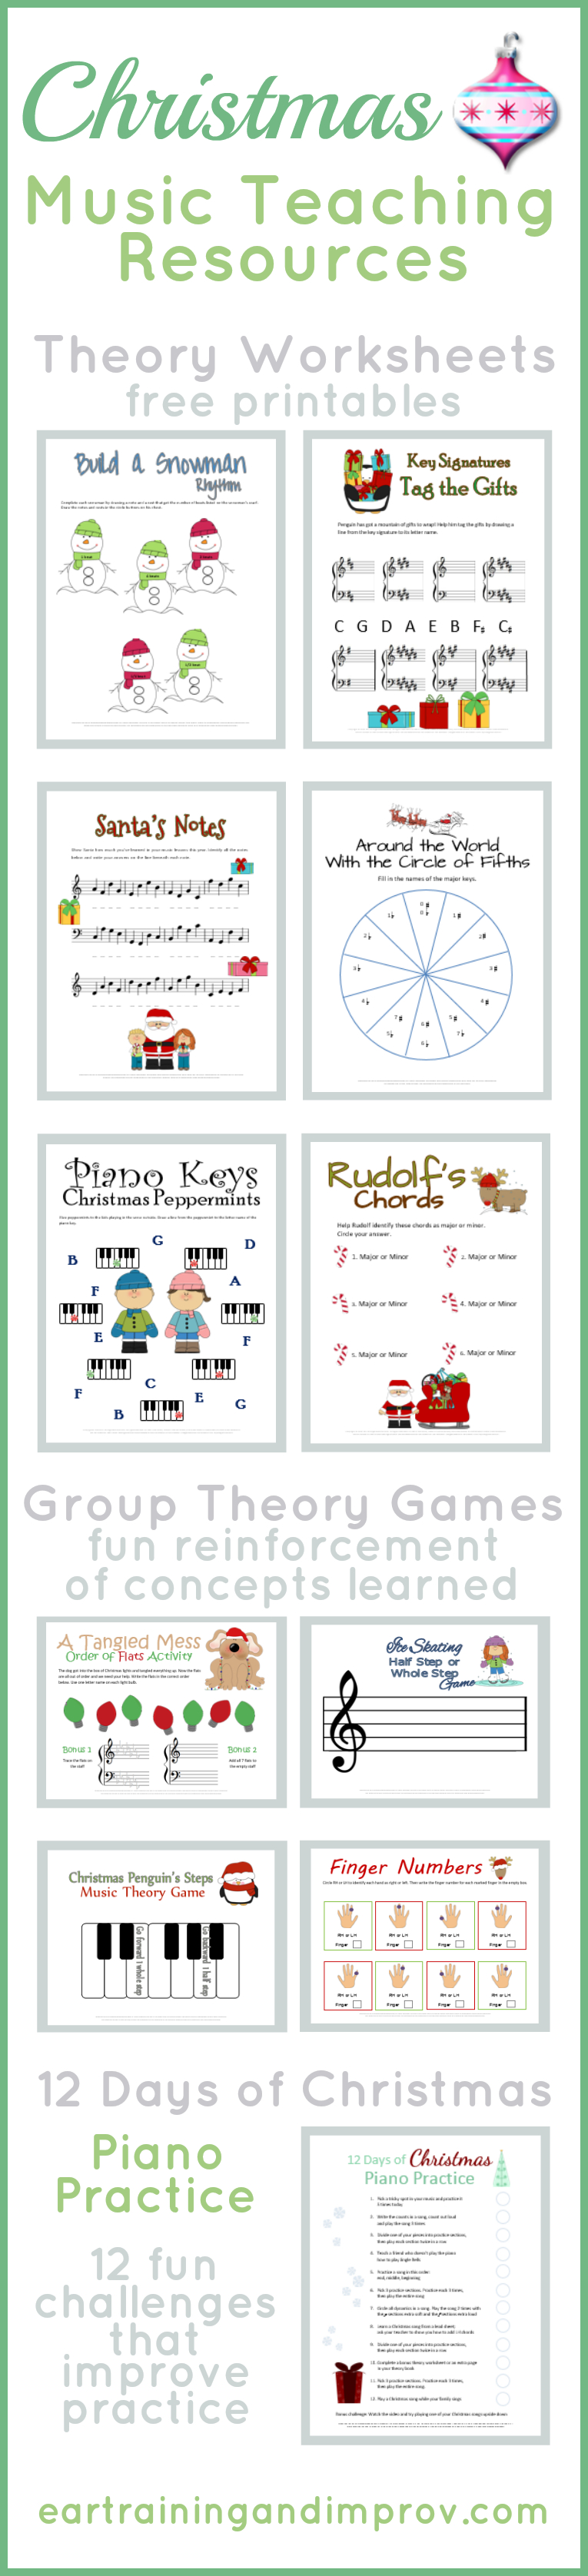 Christmas Music Theory Worksheets - 20+ Free Printables | Free Printable Music Theory Worksheets